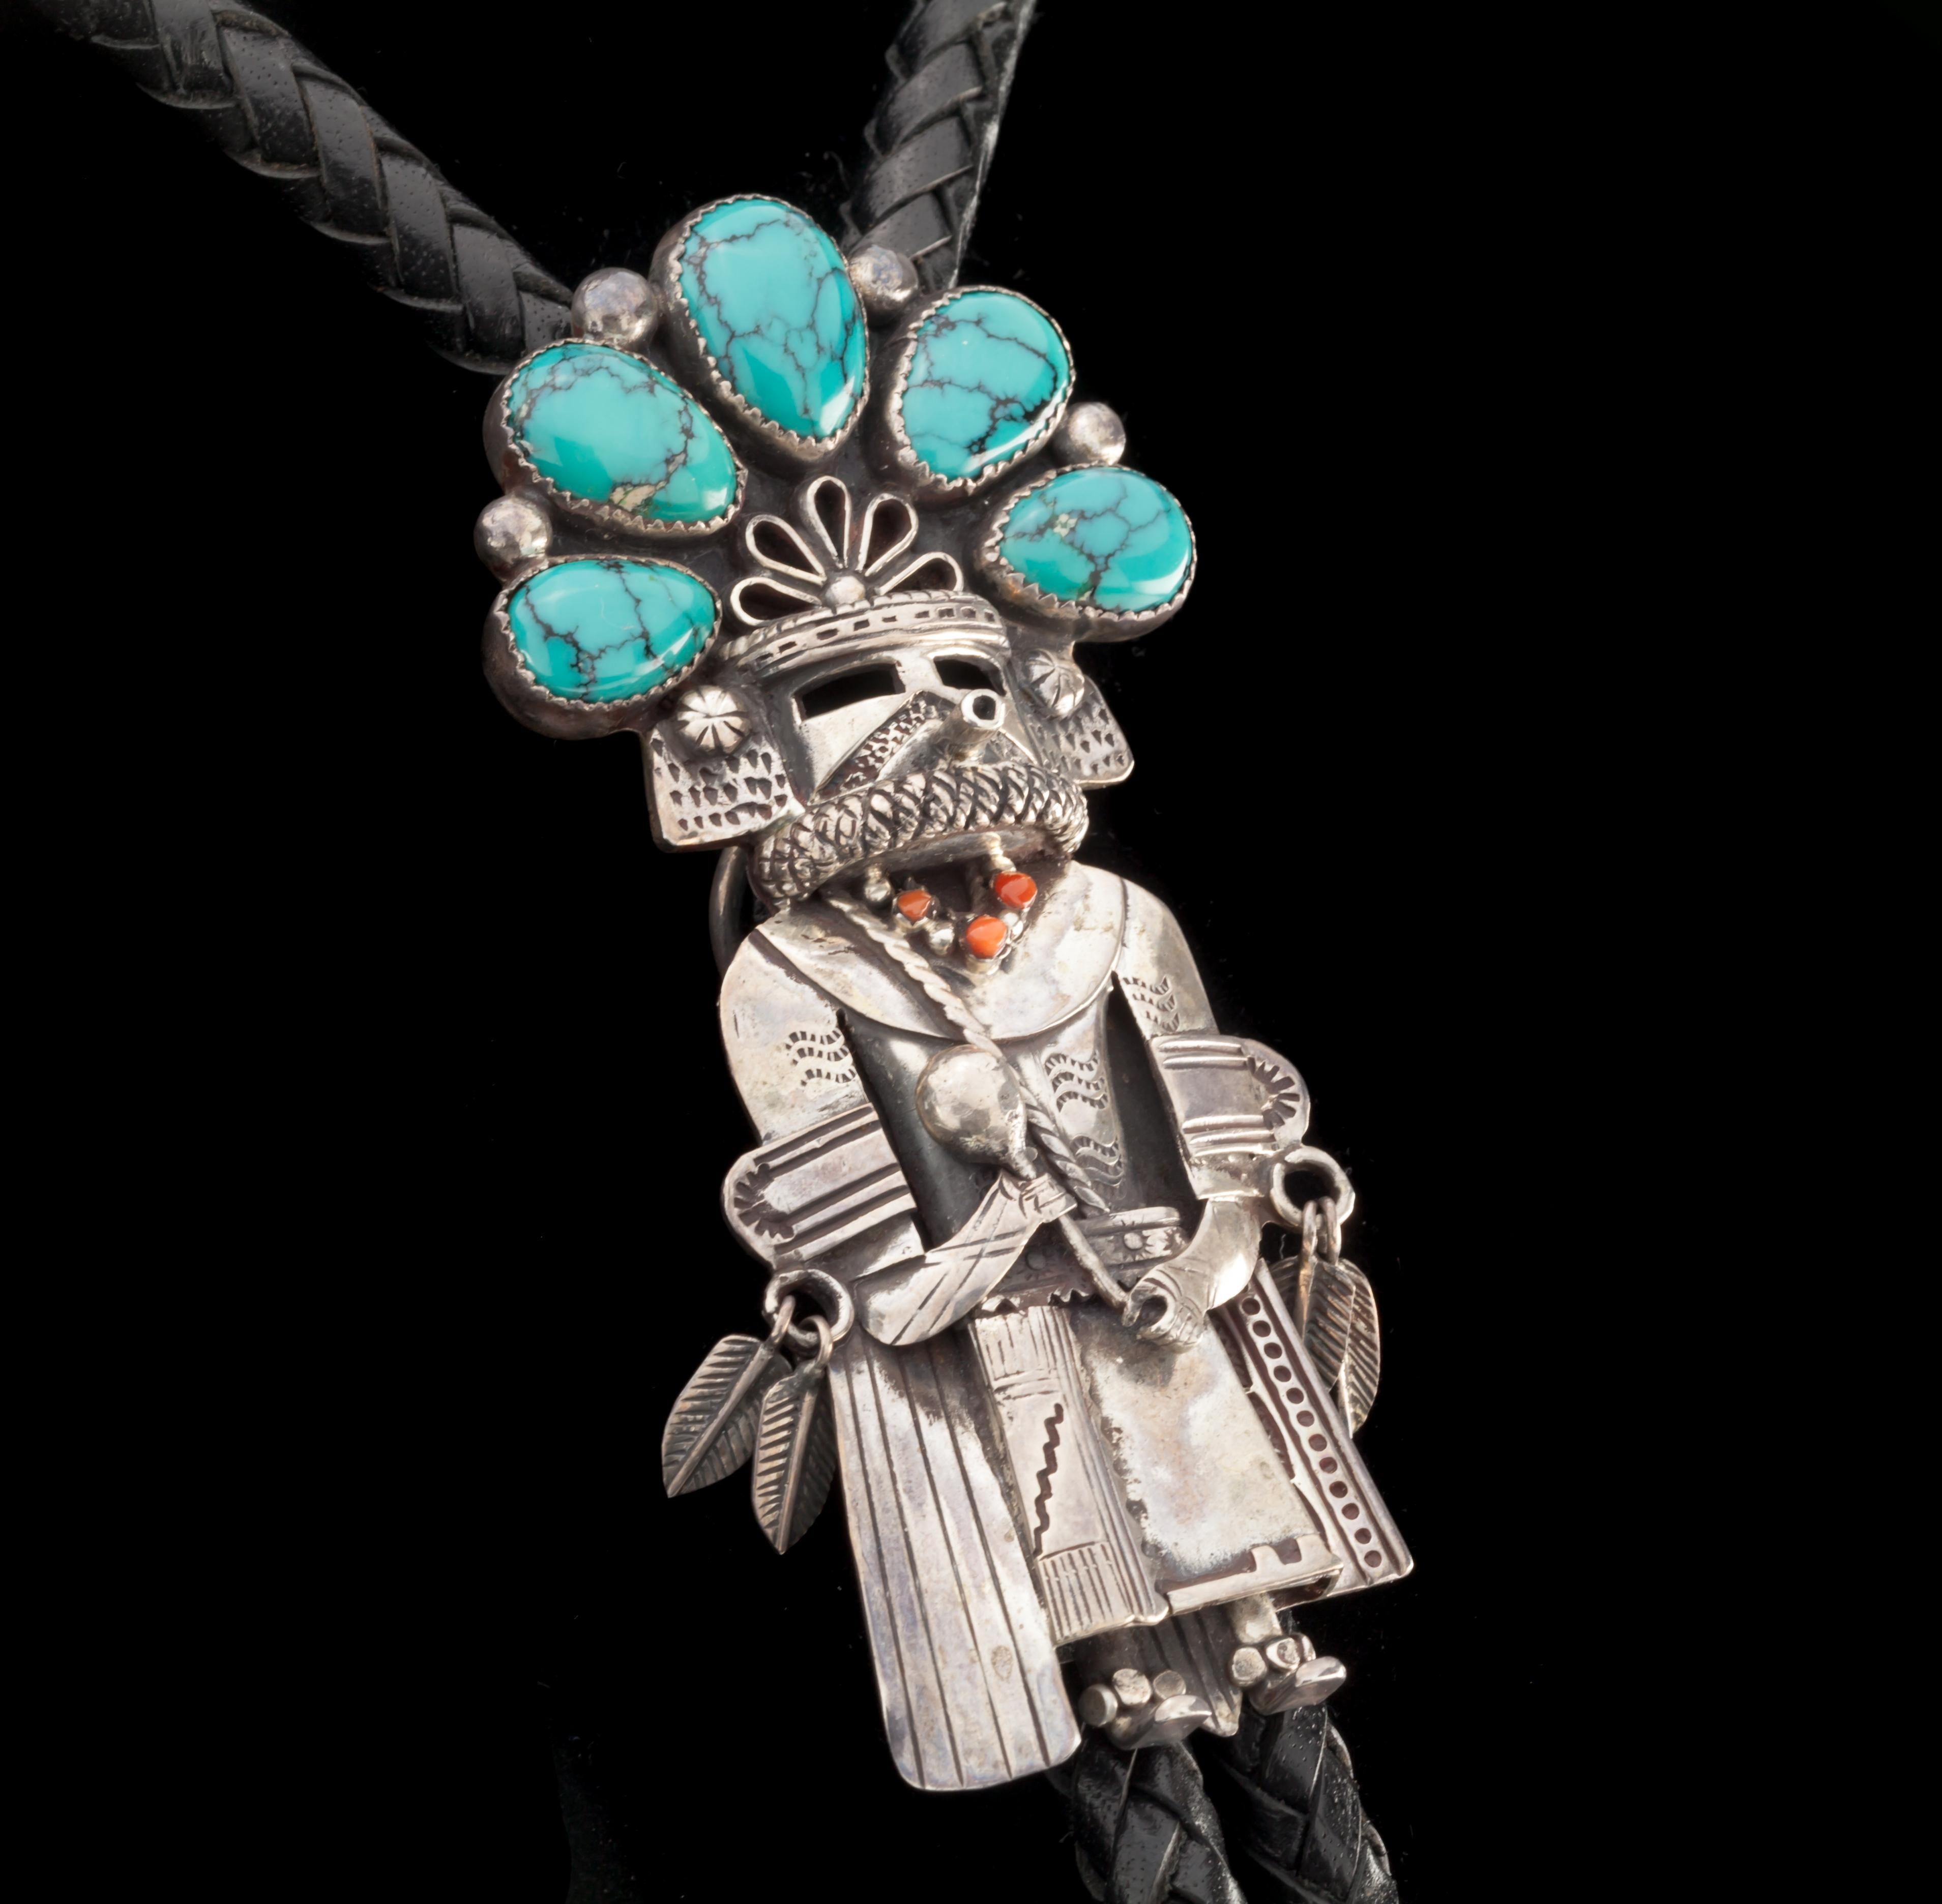 Native American Navajo Handcrafted Sterling Silver & Turquoise Kachina Black Leather Bolo Tie